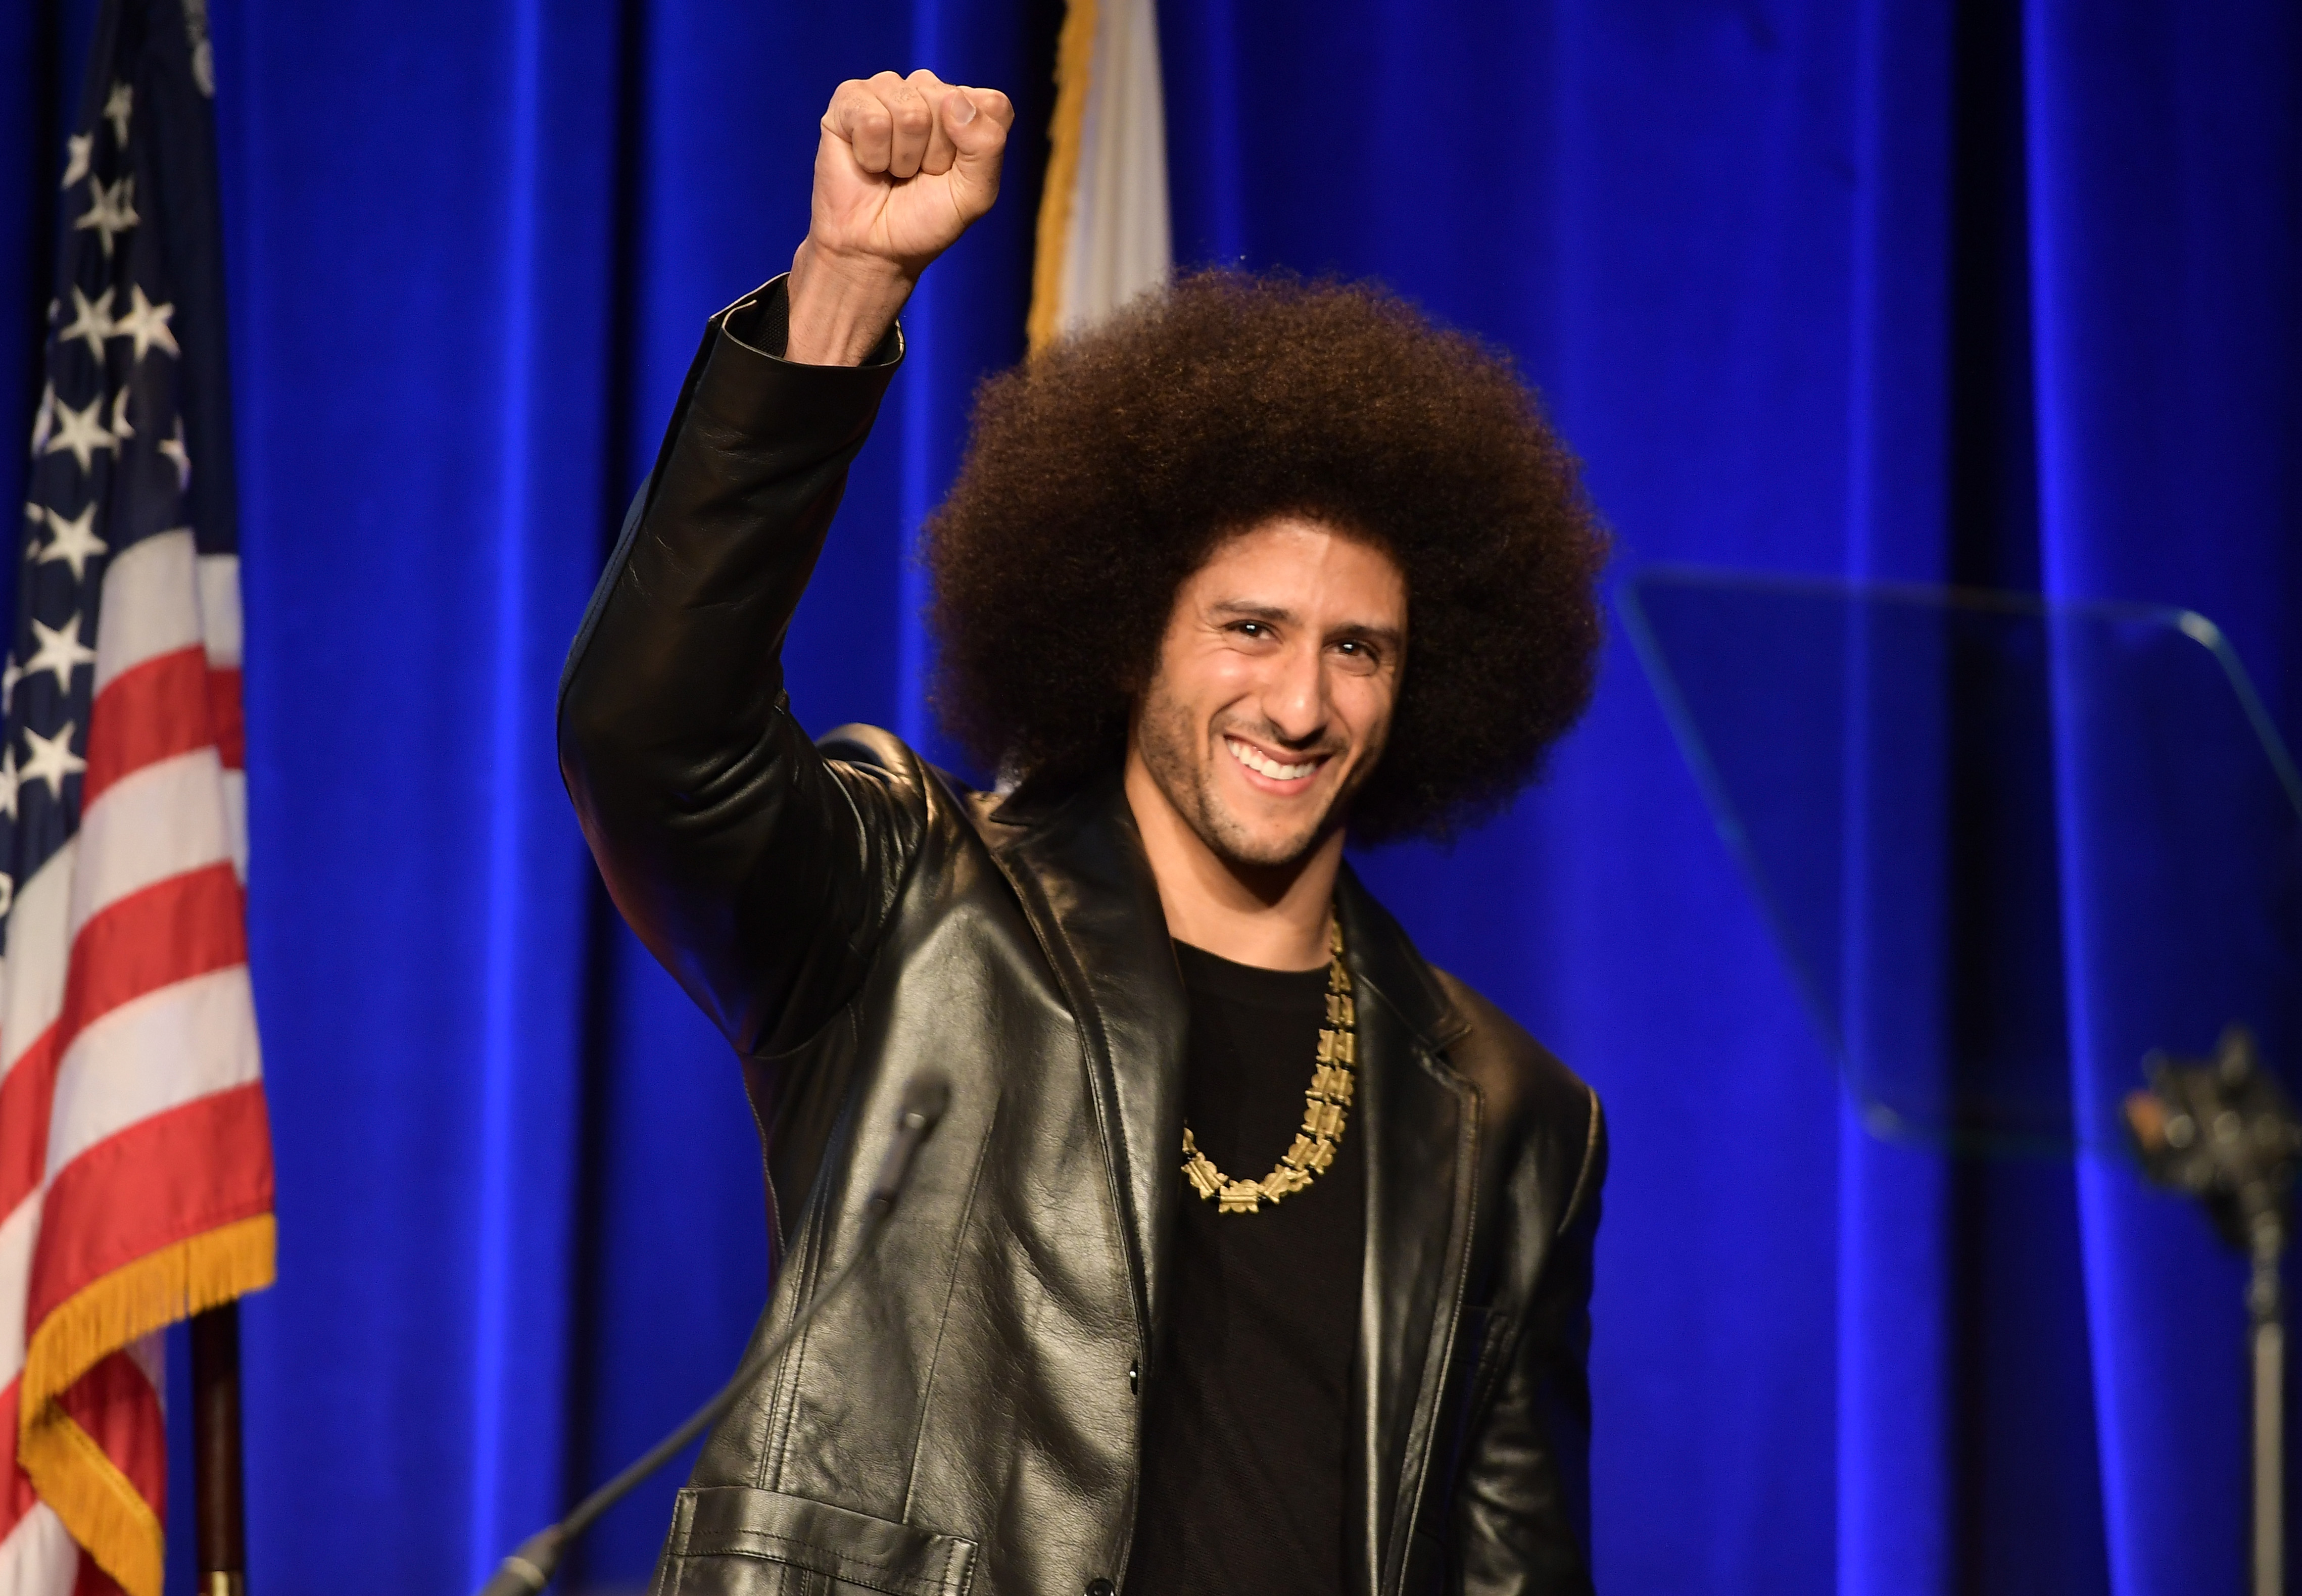 Honoree Colin Kaepernick speaks onstage at ACLU SoCal Hosts Annual Bill of Rights Dinner at the Beverly Wilshire Four Seasons Hotel on December 3, 2017 in Beverly Hills, California.  (Photo by Matt Winkelmeyer/Getty Images)